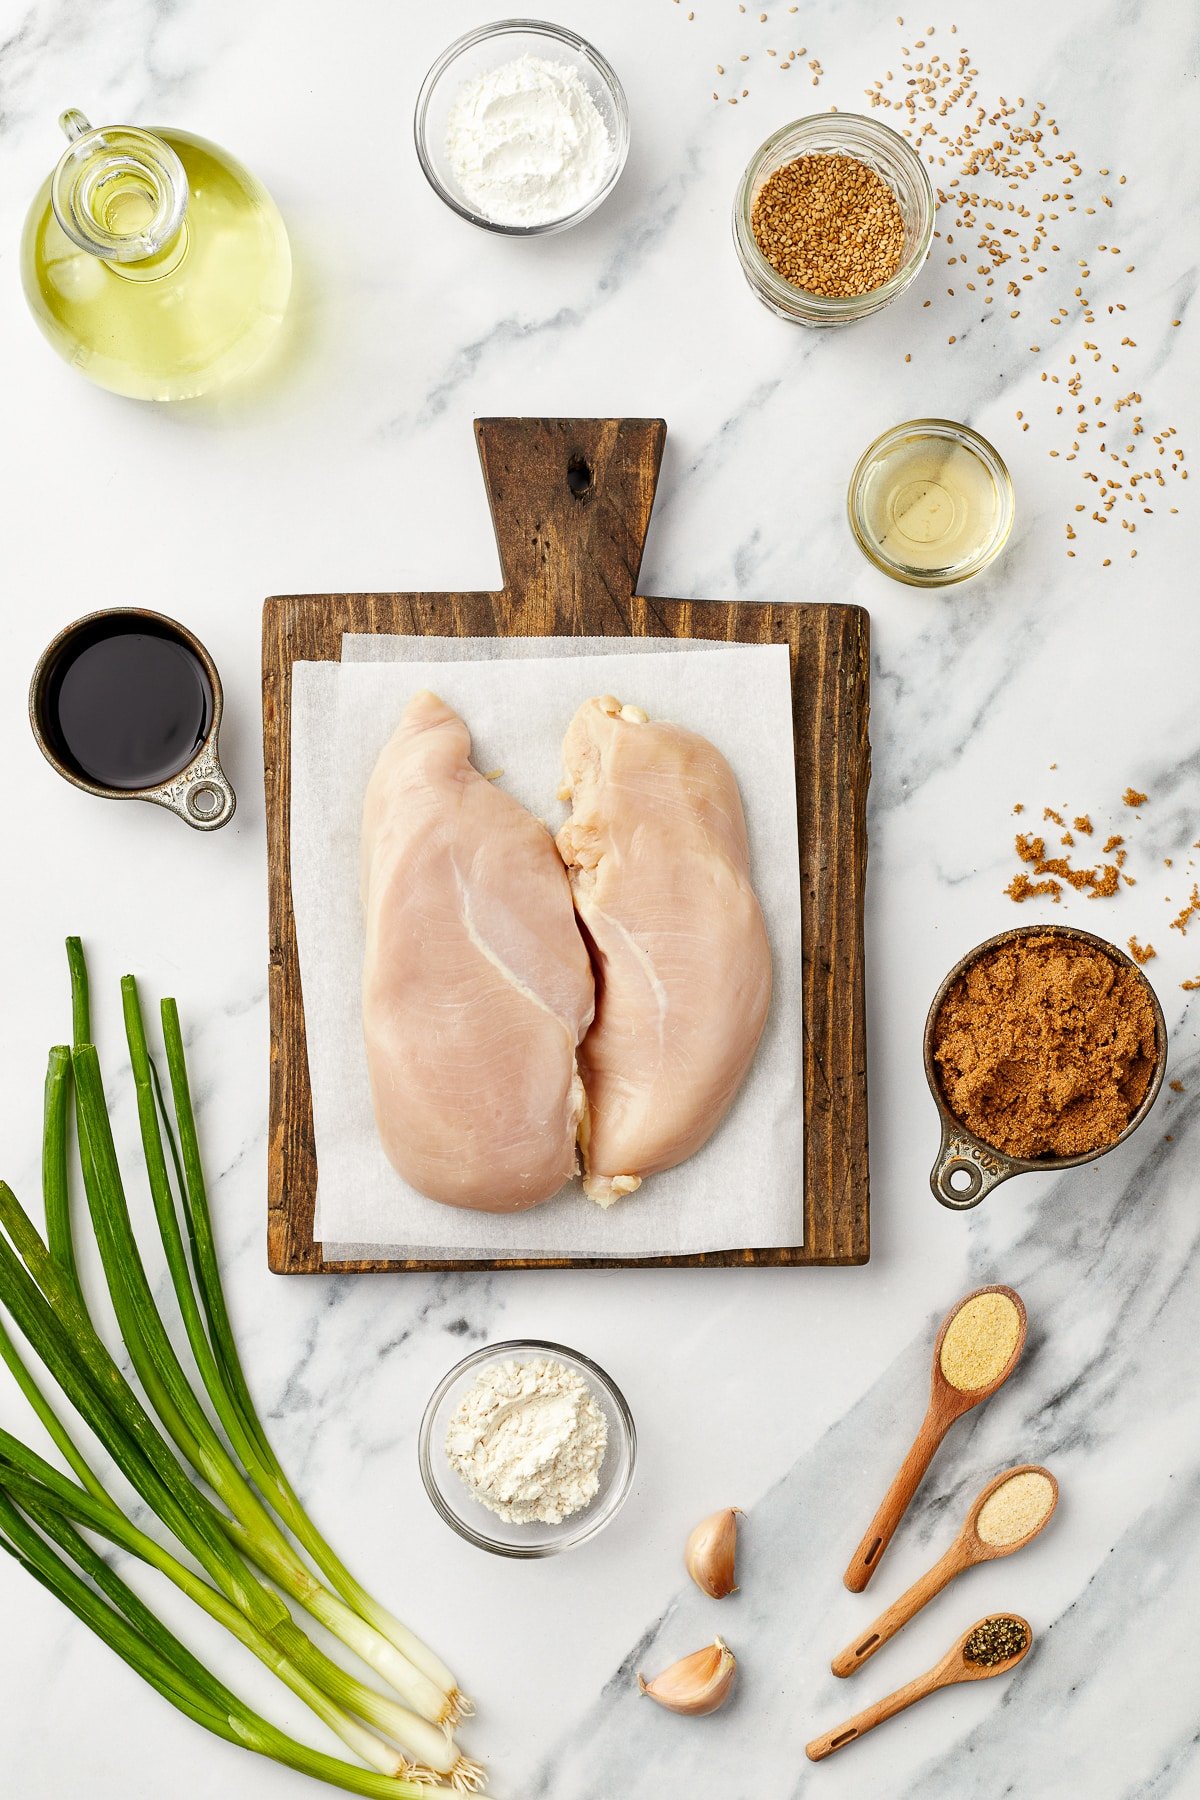 Ingredients needed to make Chinese Chicken recipe